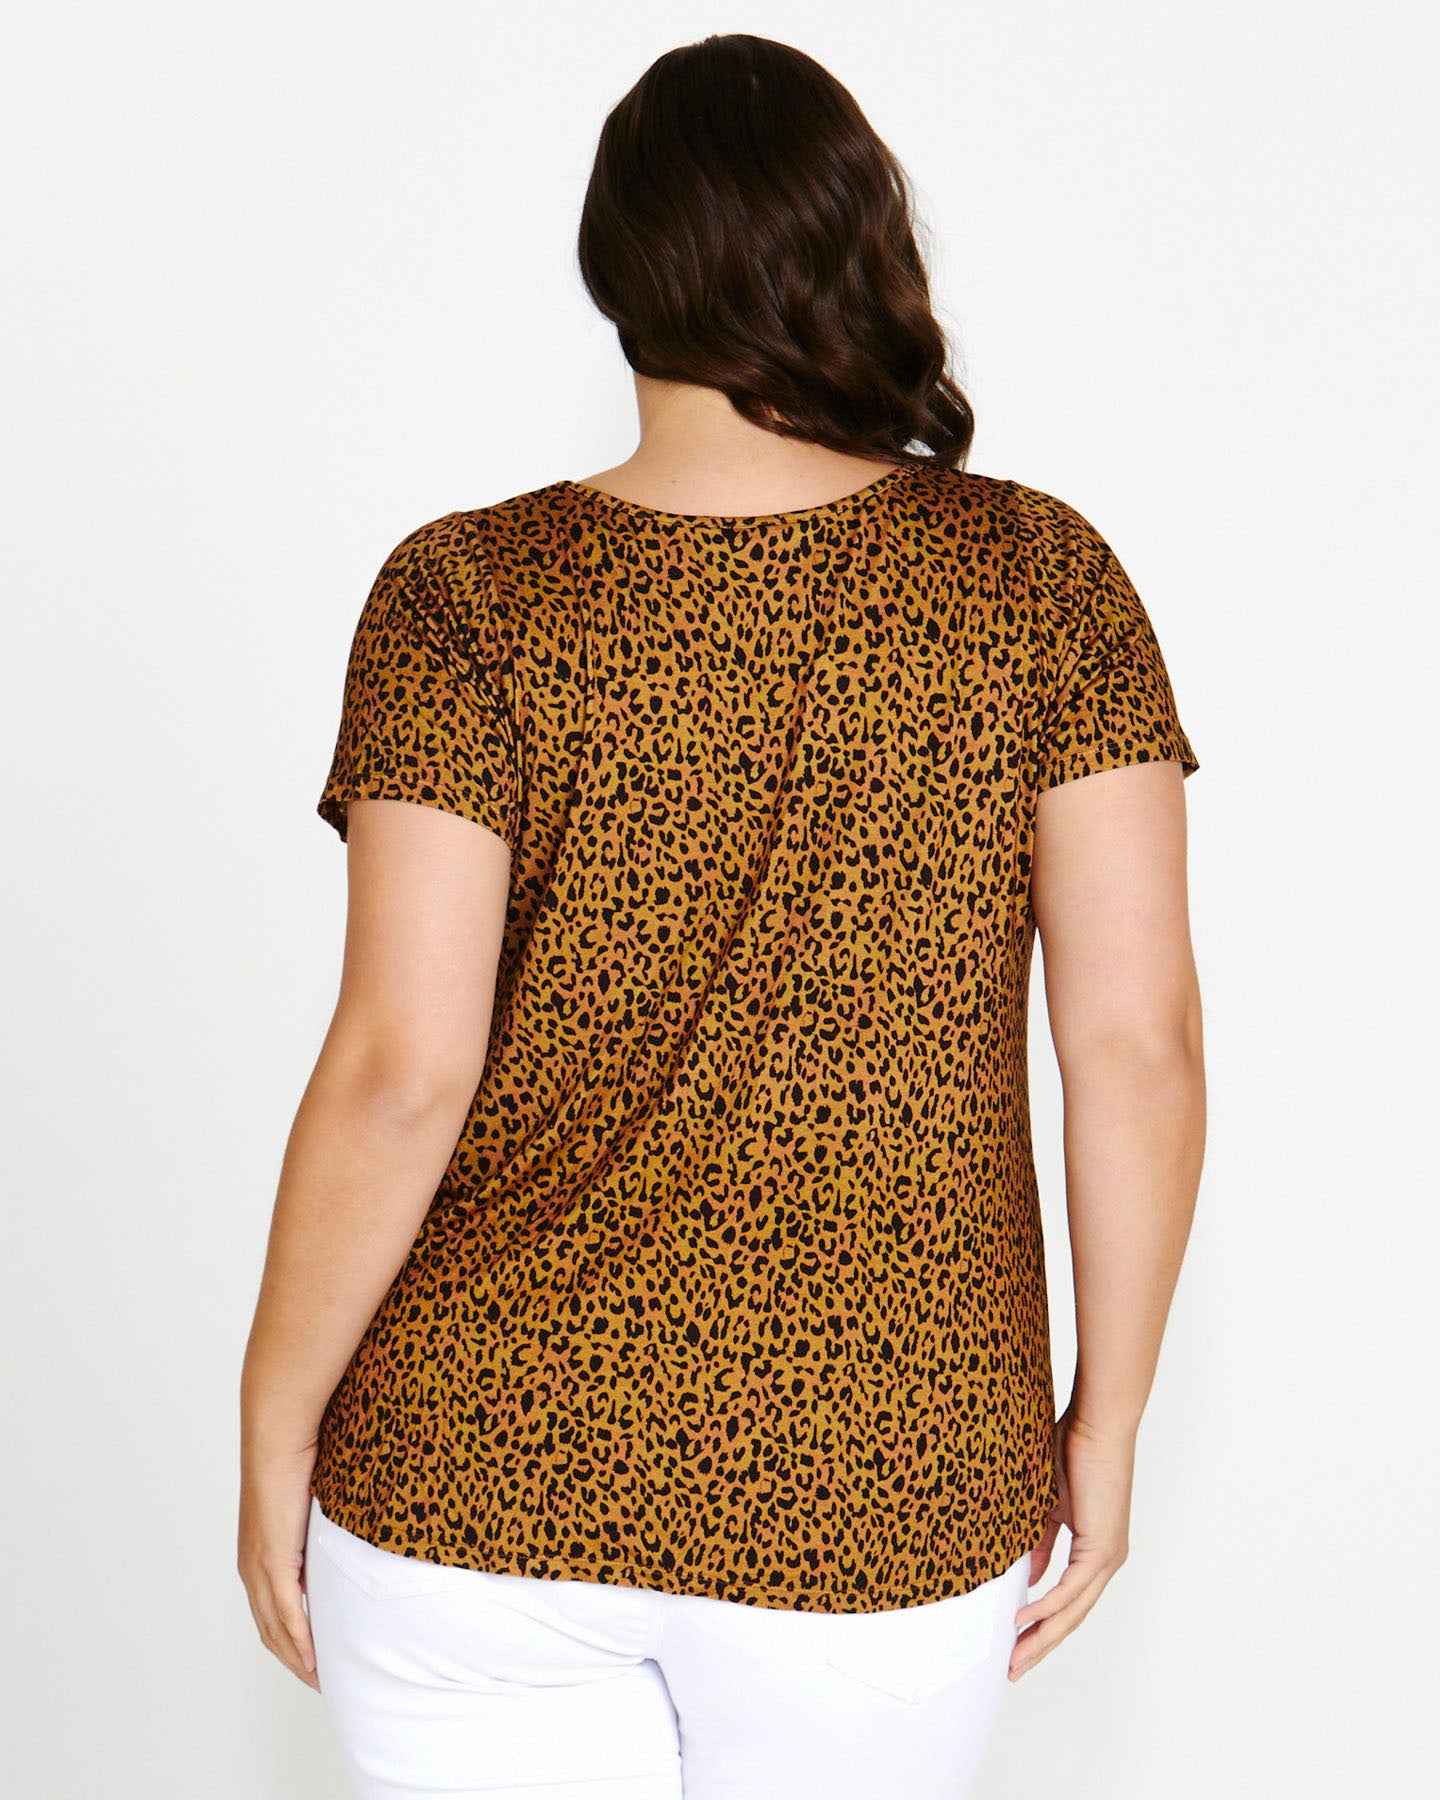 Holland Stretchy Scoop Neck Basic Tee - Wild Leopard Print